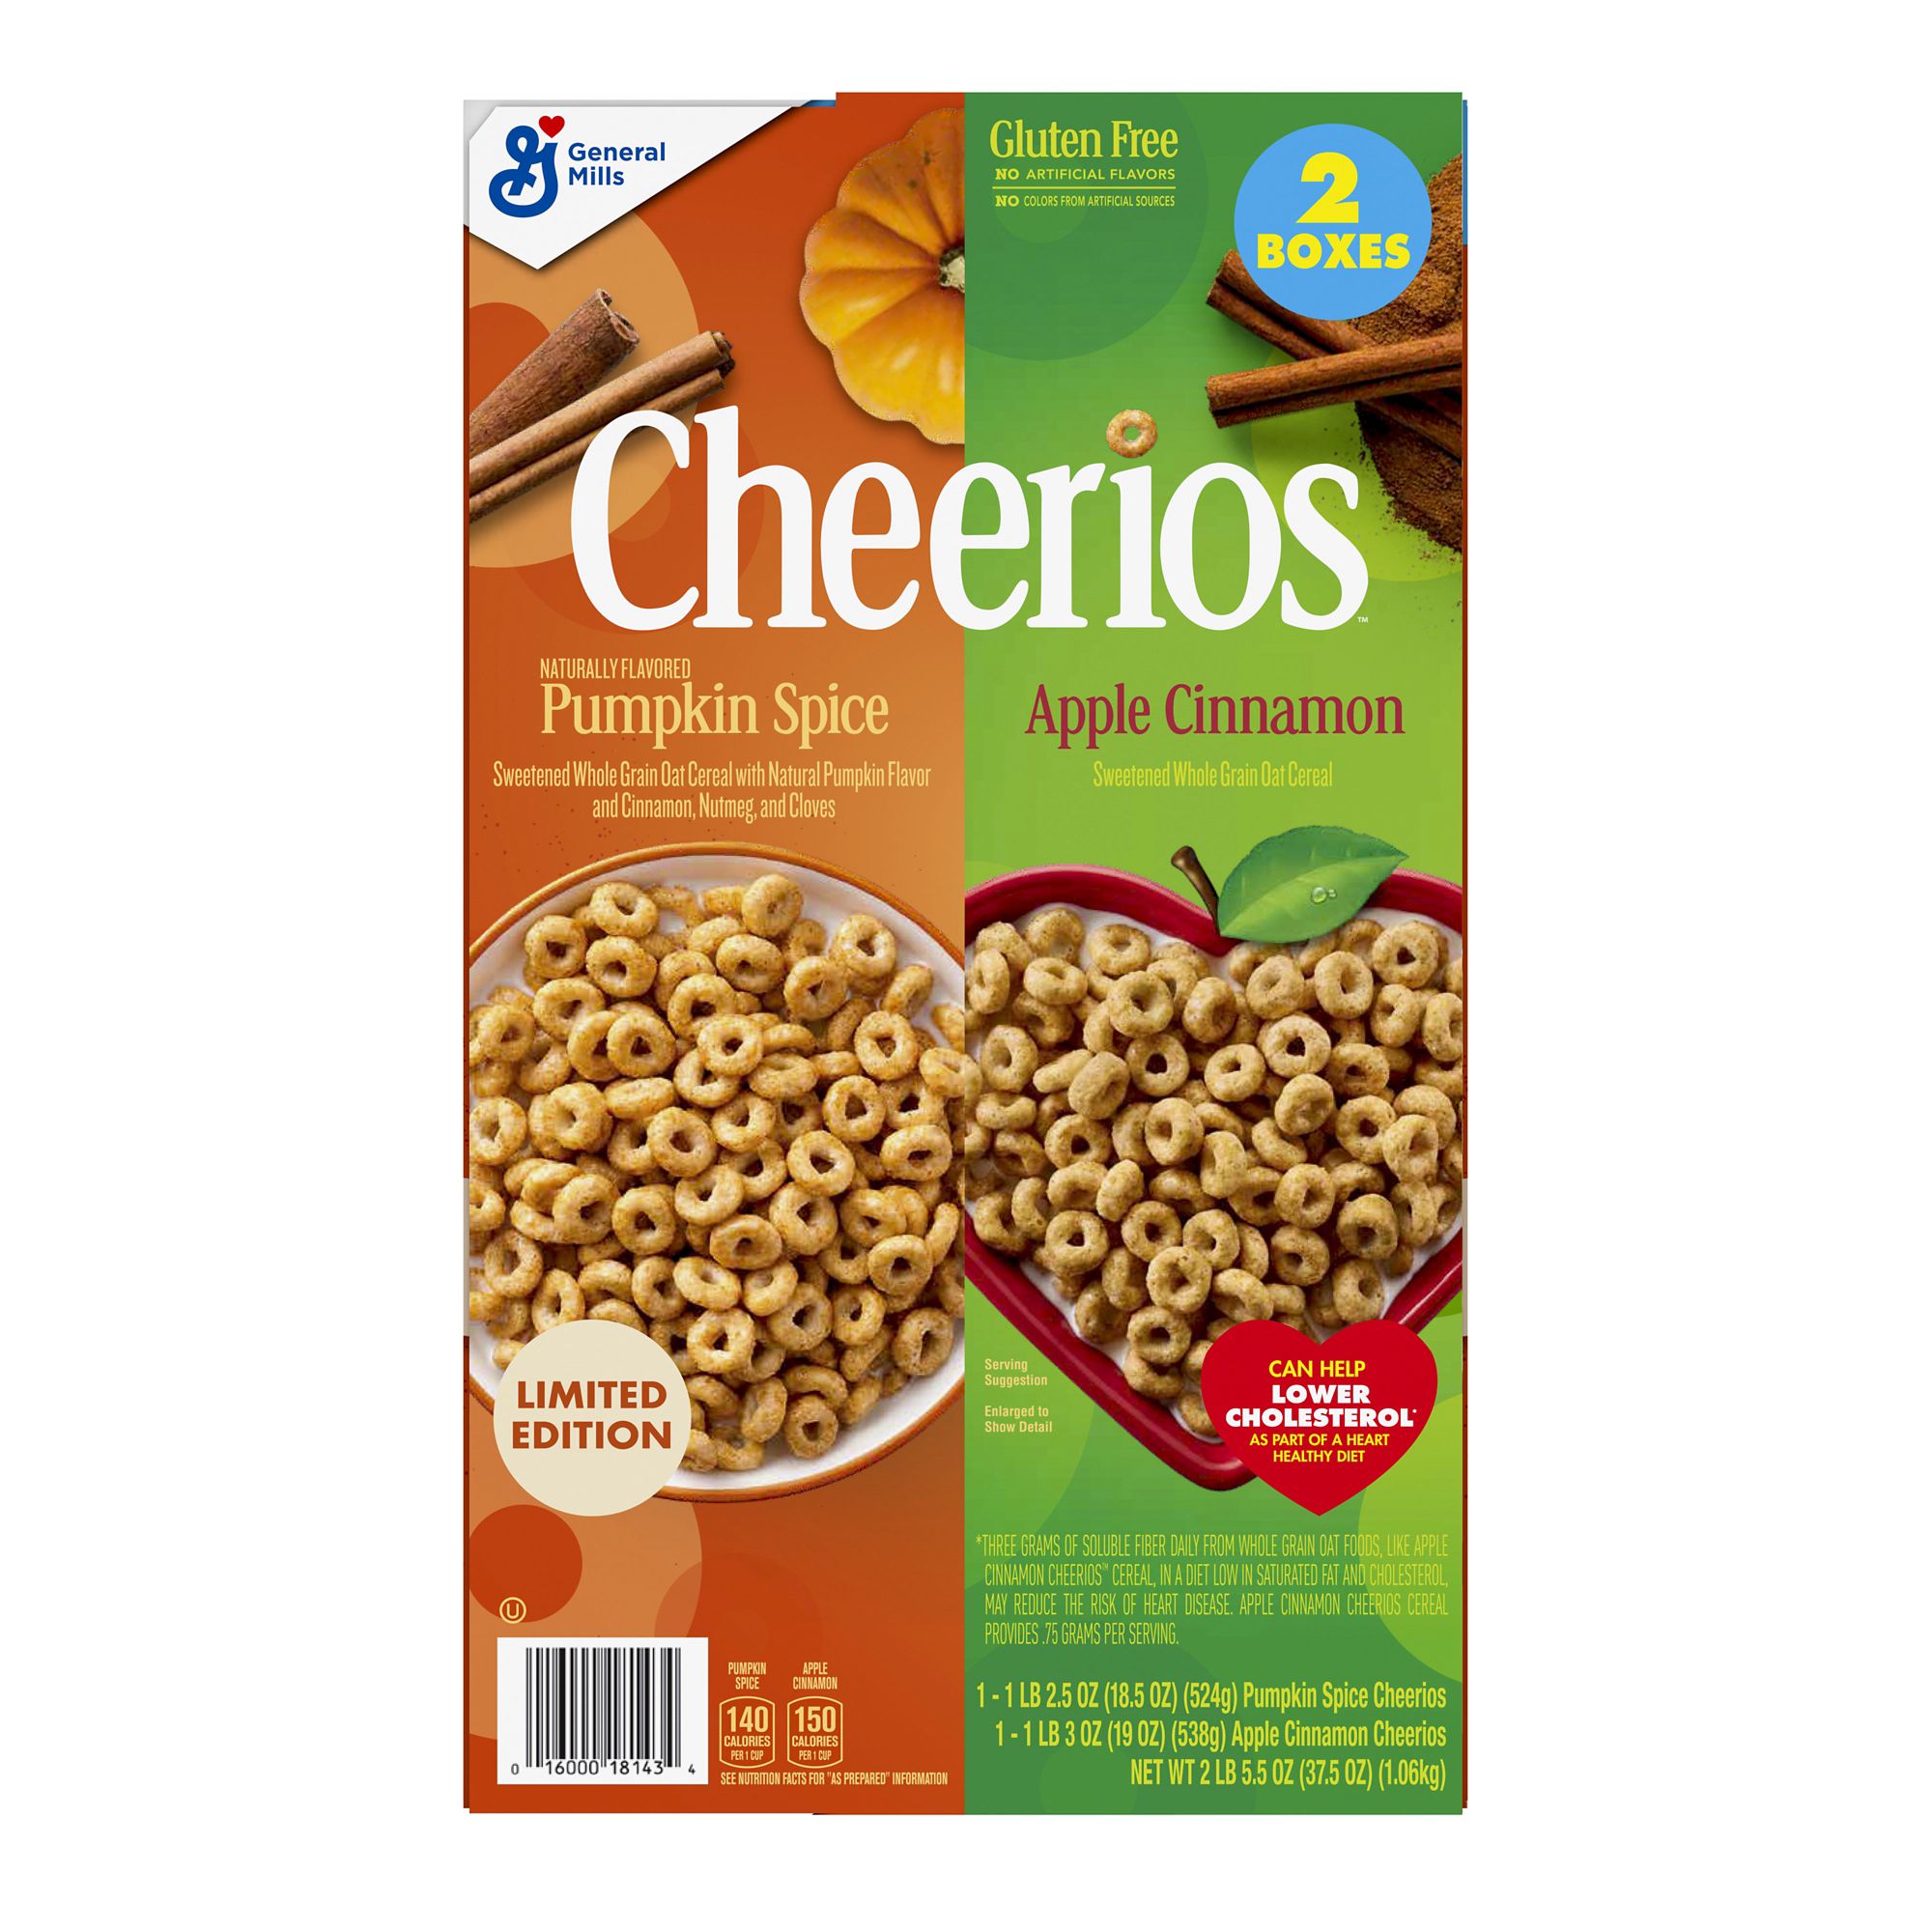  General Mills Cheerios Honey Nut Cereal, 12.25-Ounce